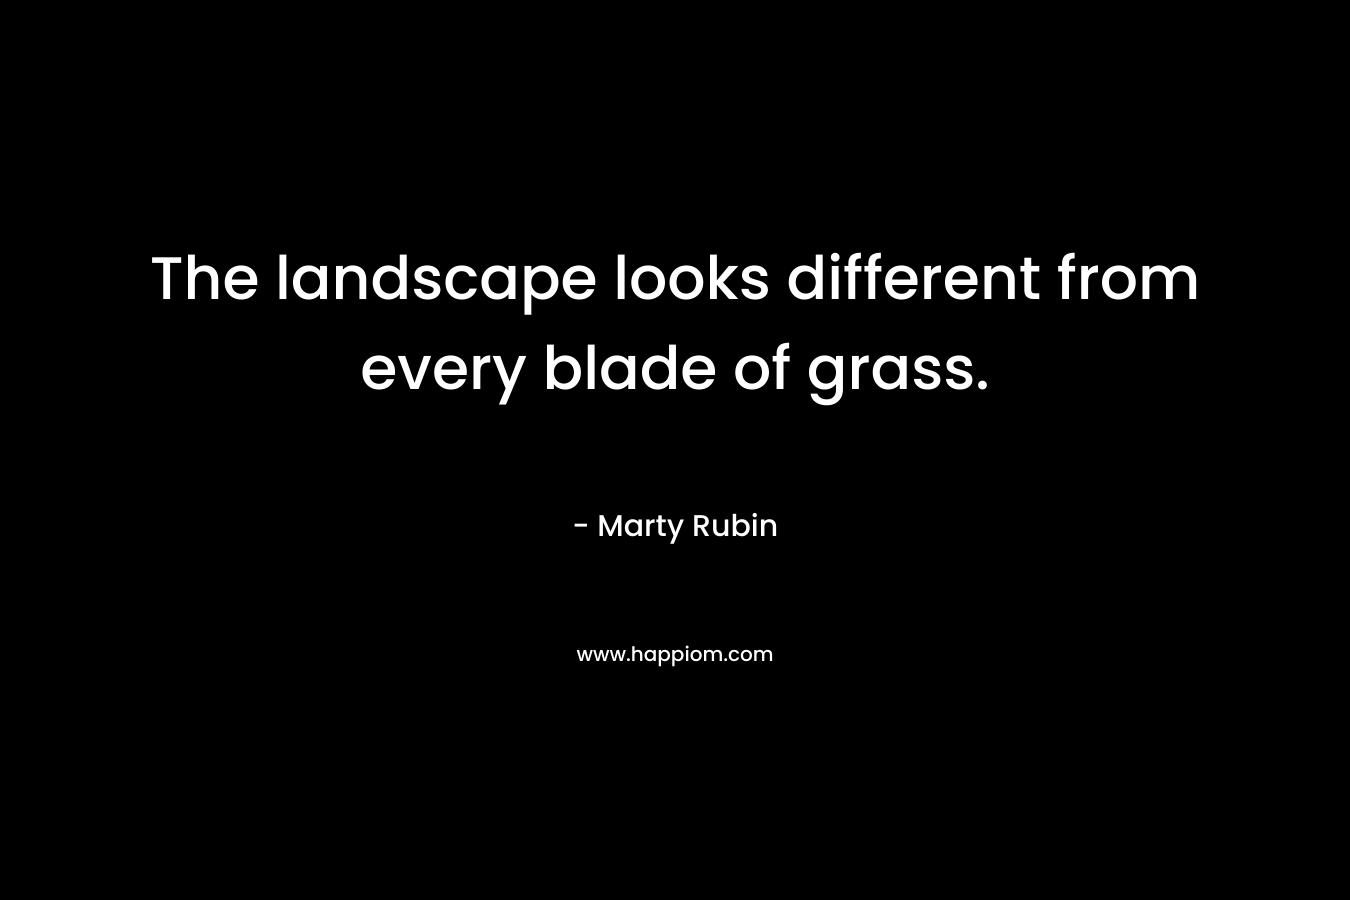 The landscape looks different from every blade of grass.